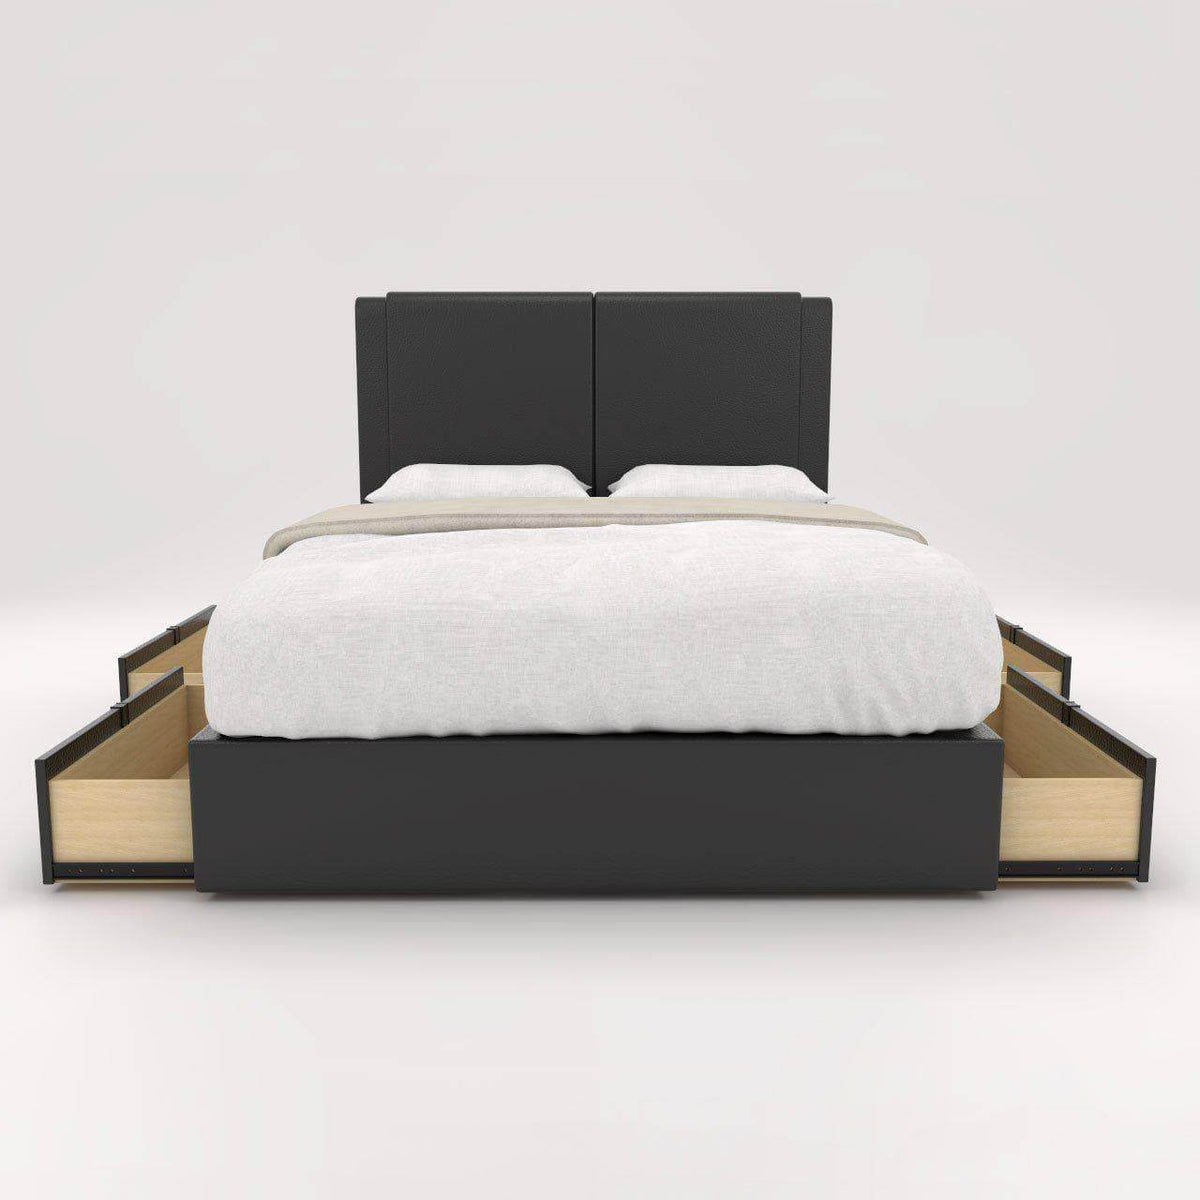 Ashleah Faux Leather Drawer Bed Frame Singapore